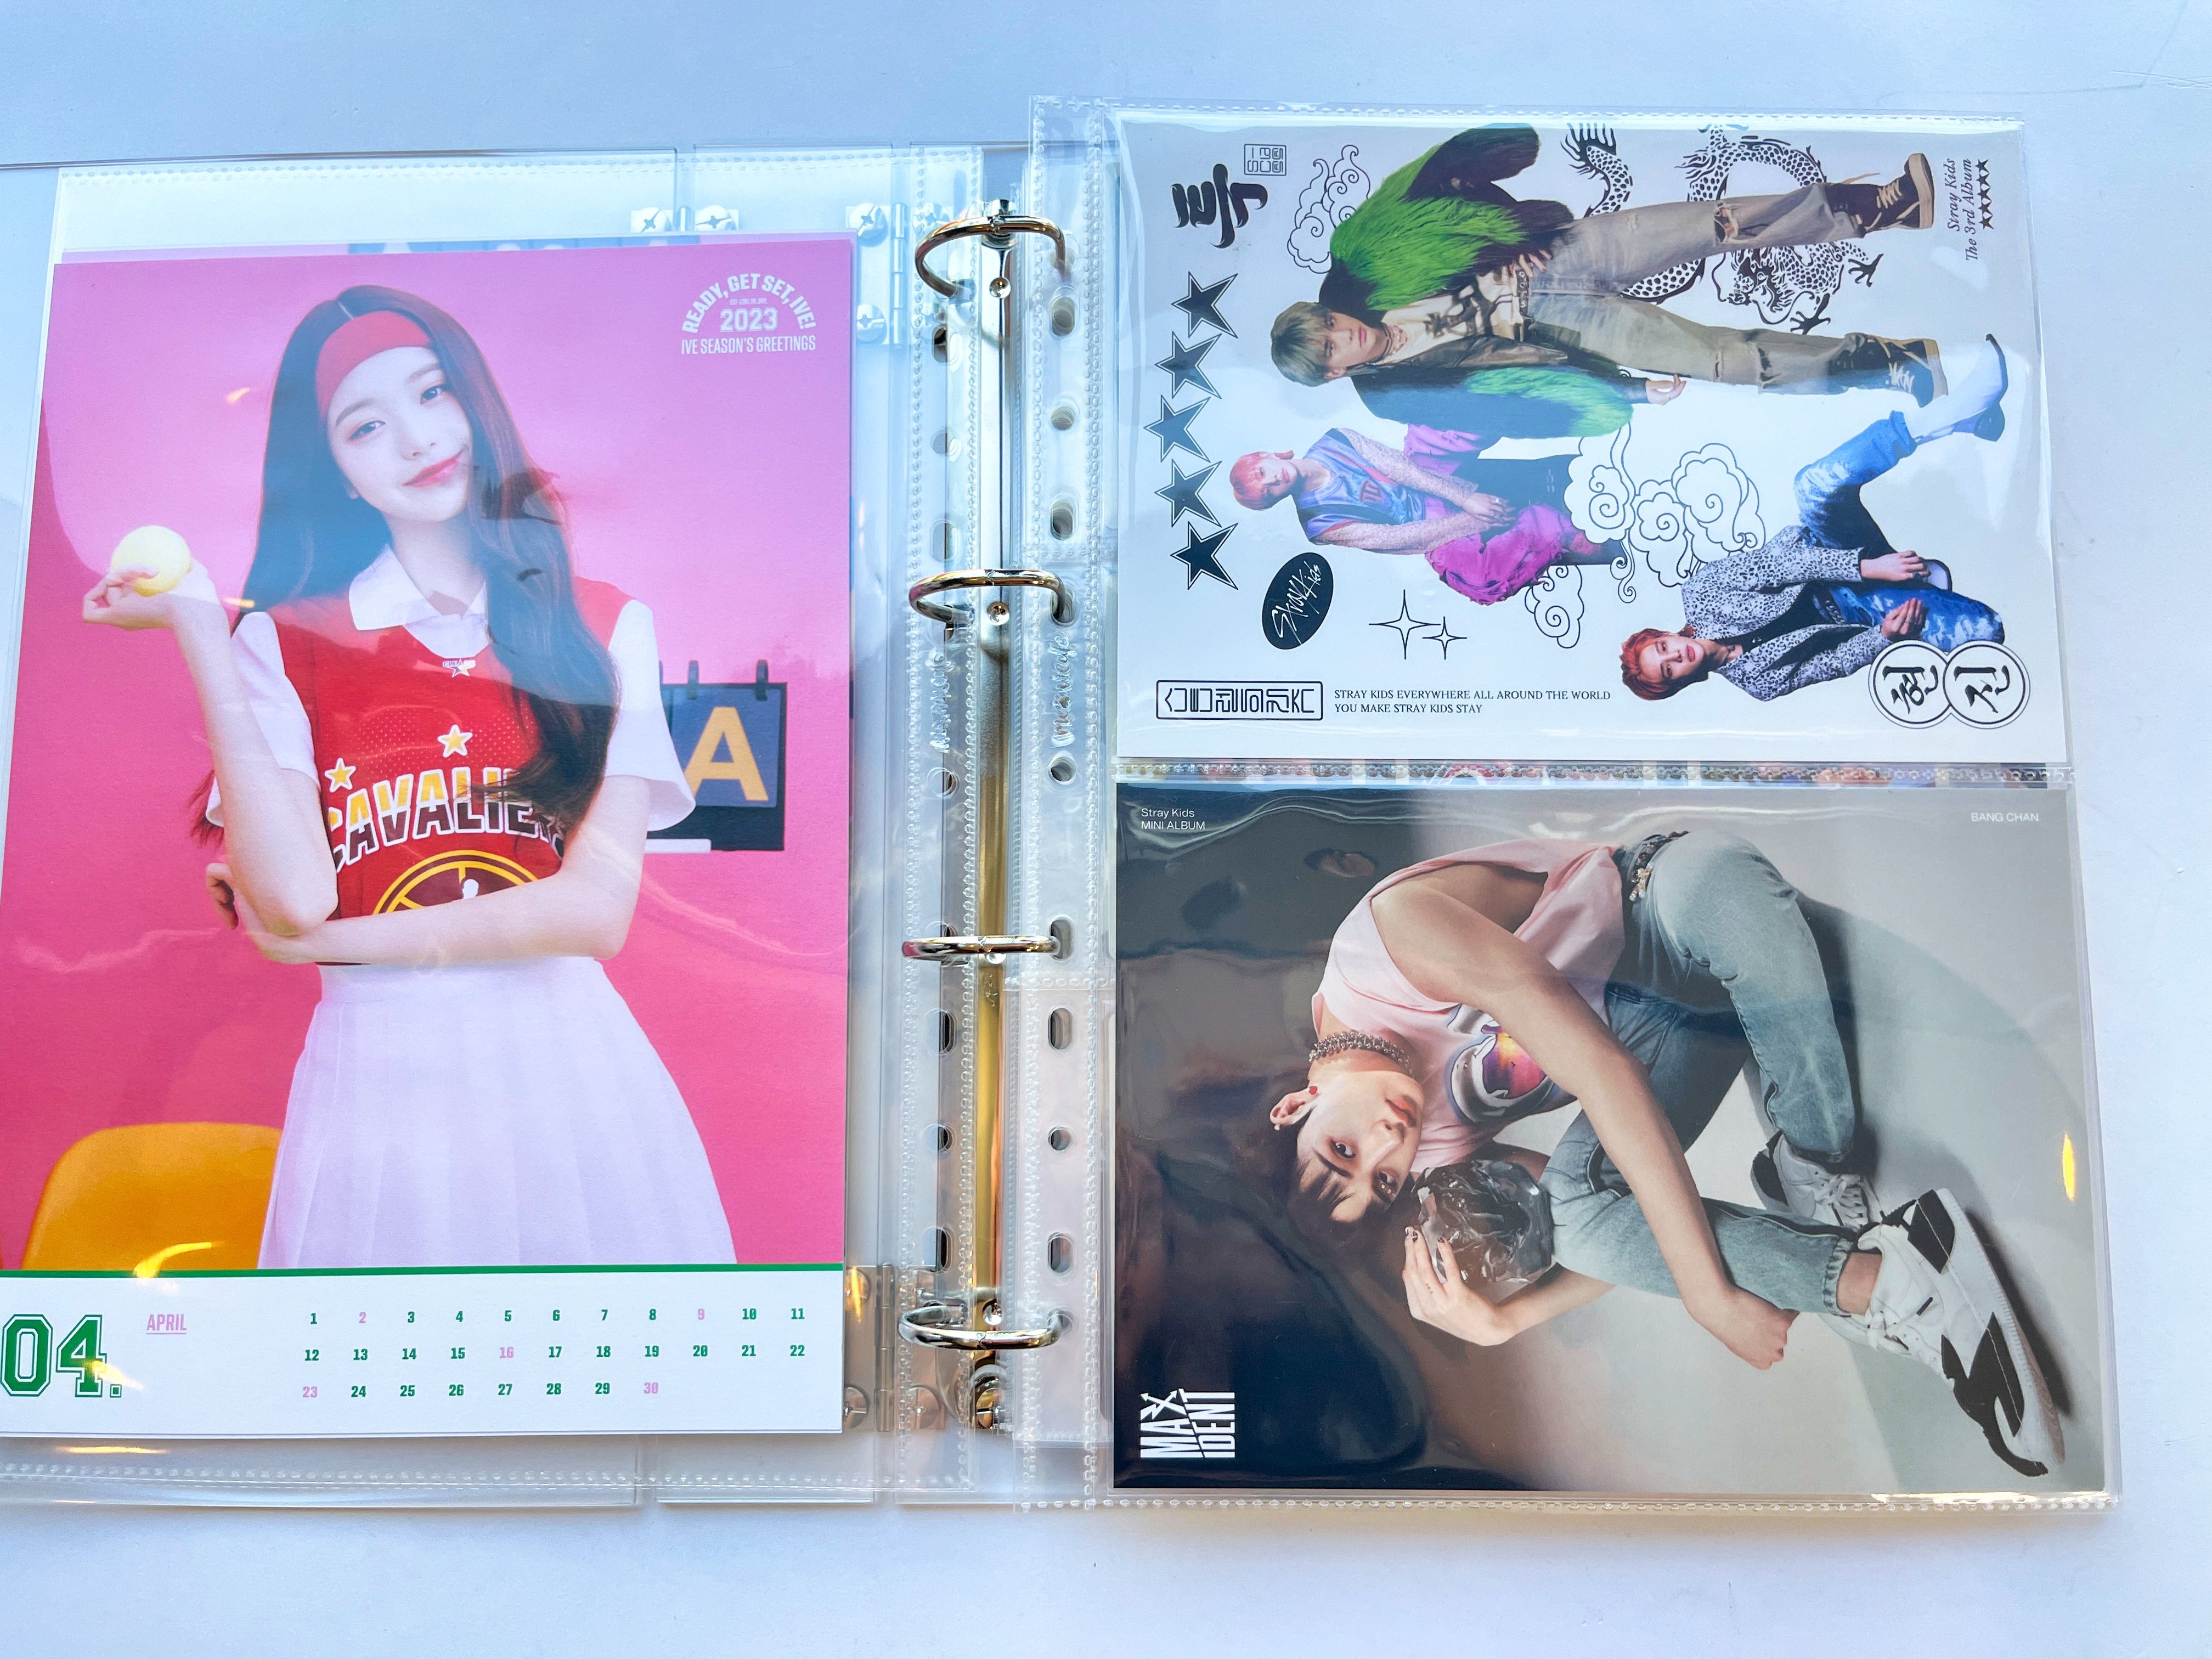 K-KEEP [A4 Standard] - Acrylic Series -  Aesthetic Hardcover Binder 4 x 1.25 inch D-Ring | Large Capacity Kpop Photocard Binder (Self-Assembly Required)